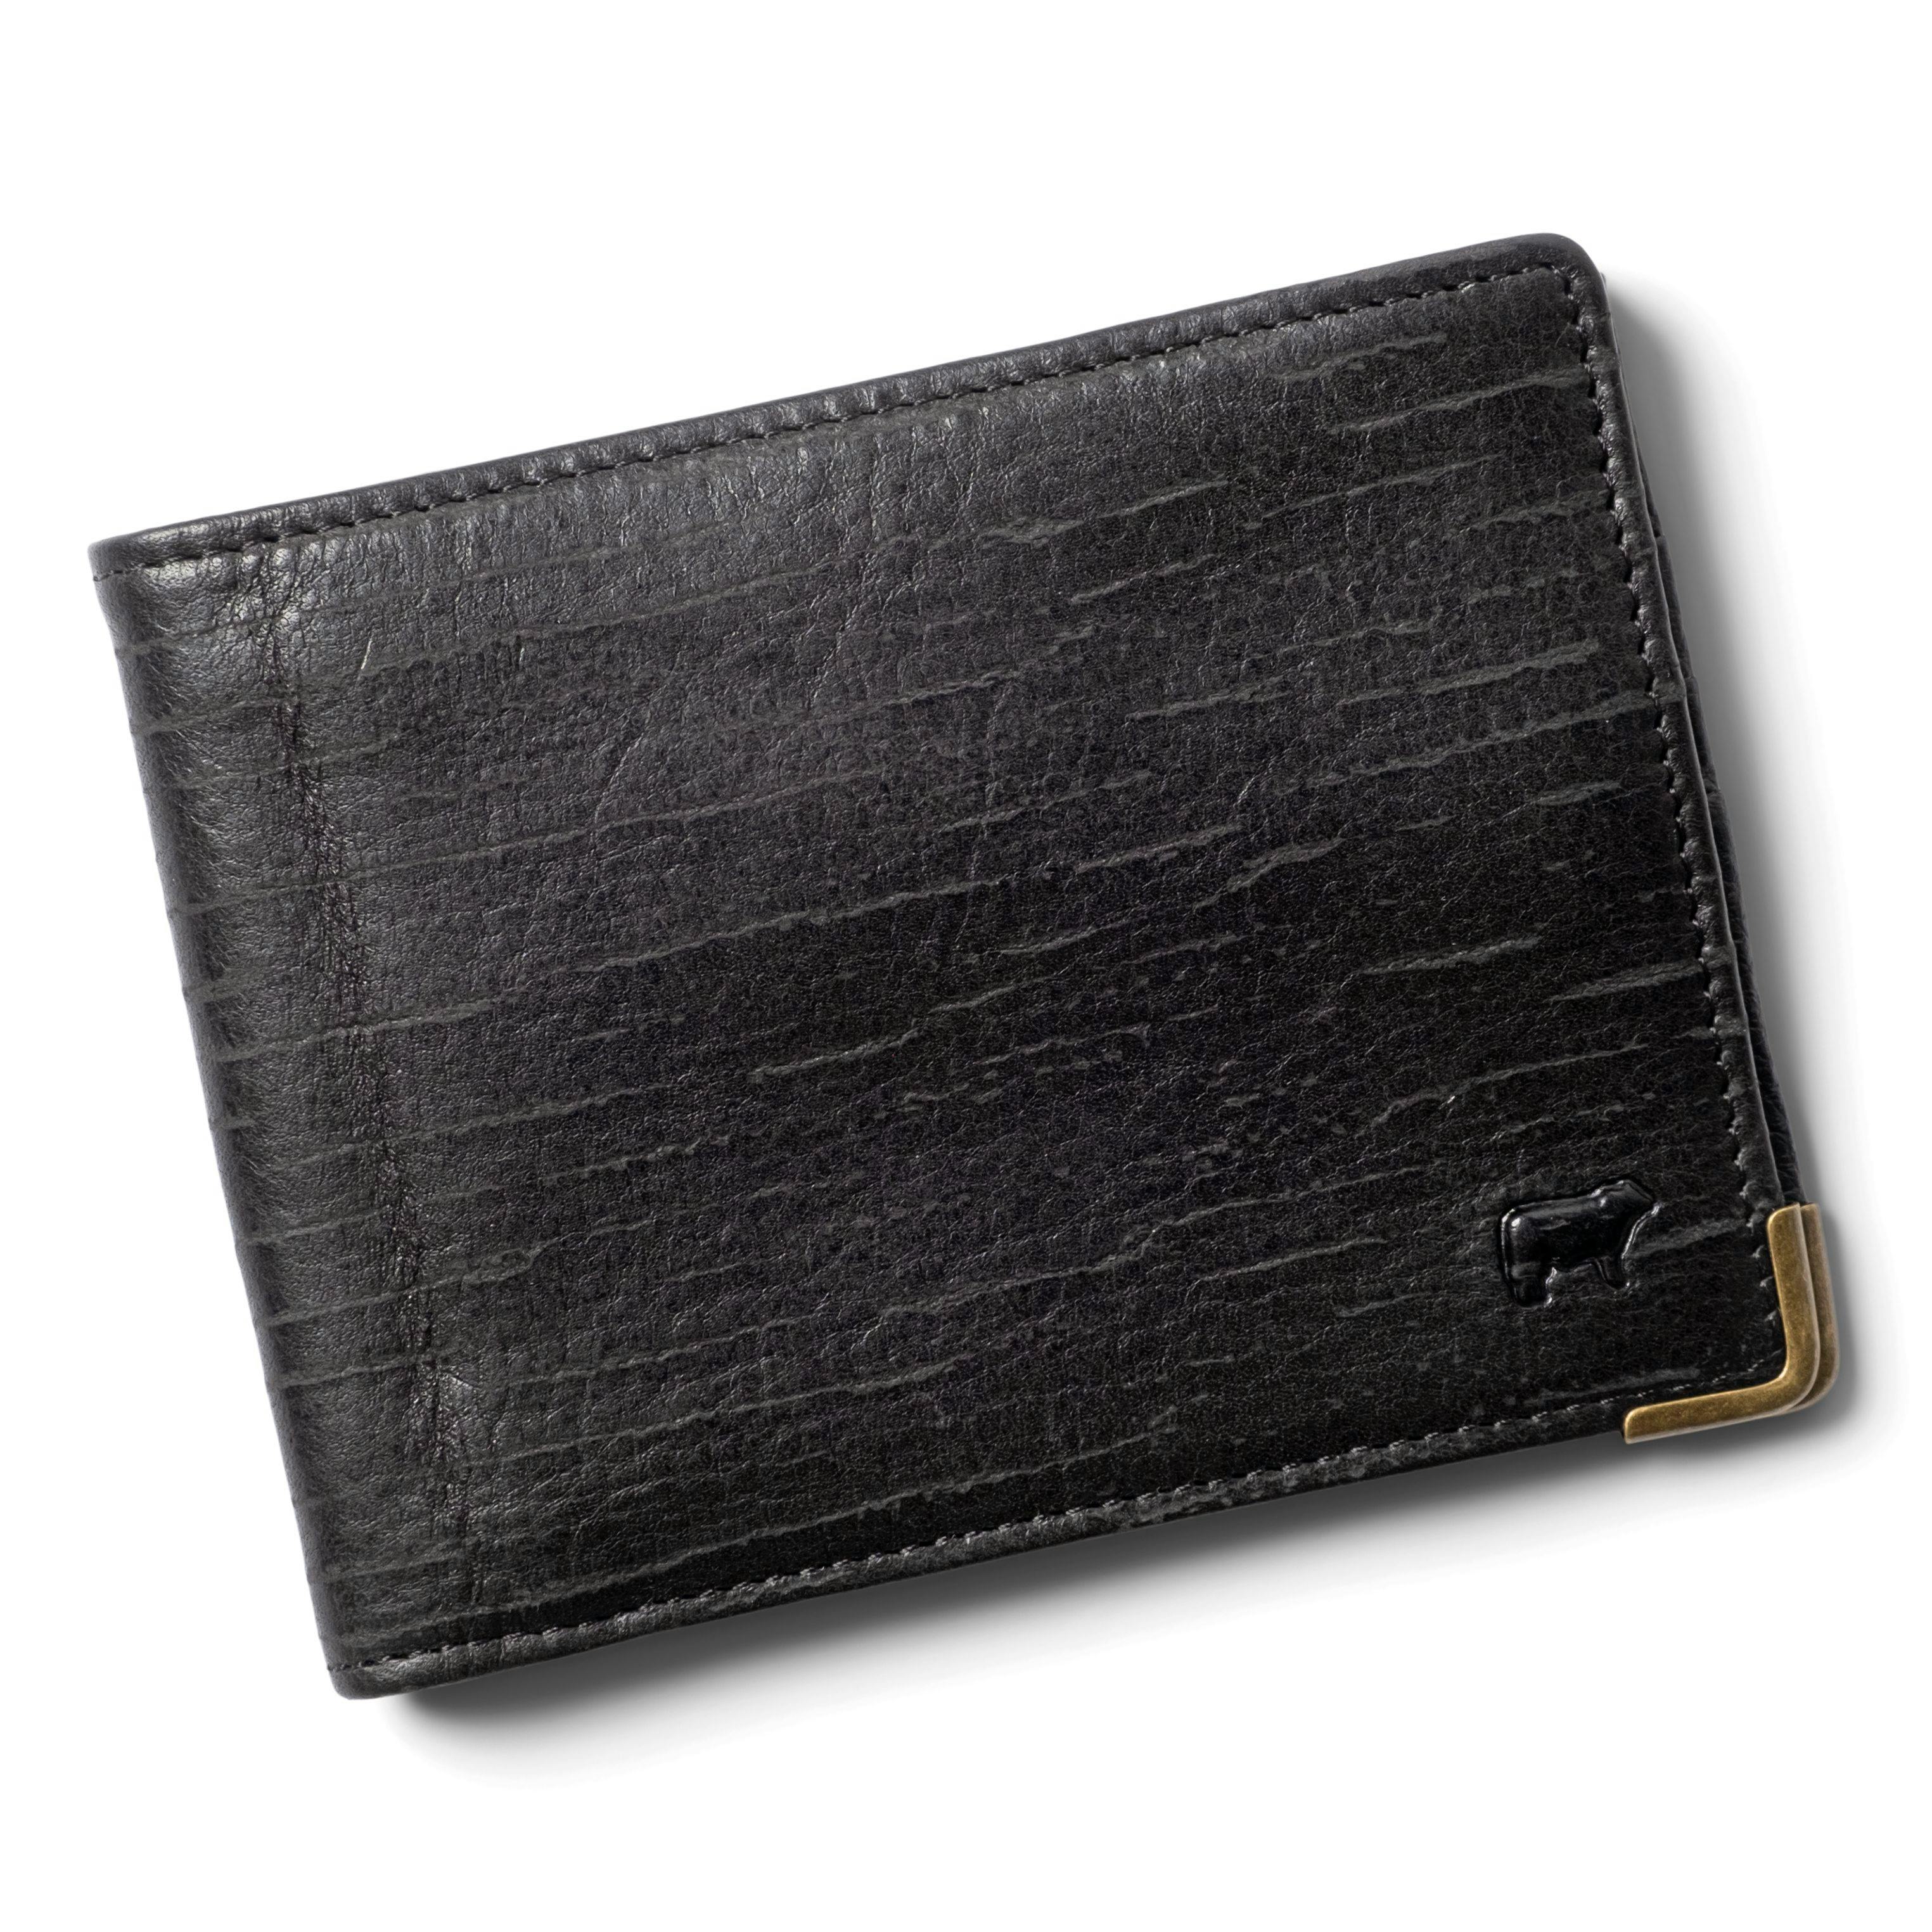 Cool Wallet, Mens Designer Wallets in Tuscany leather from Axess! -  axesswallets